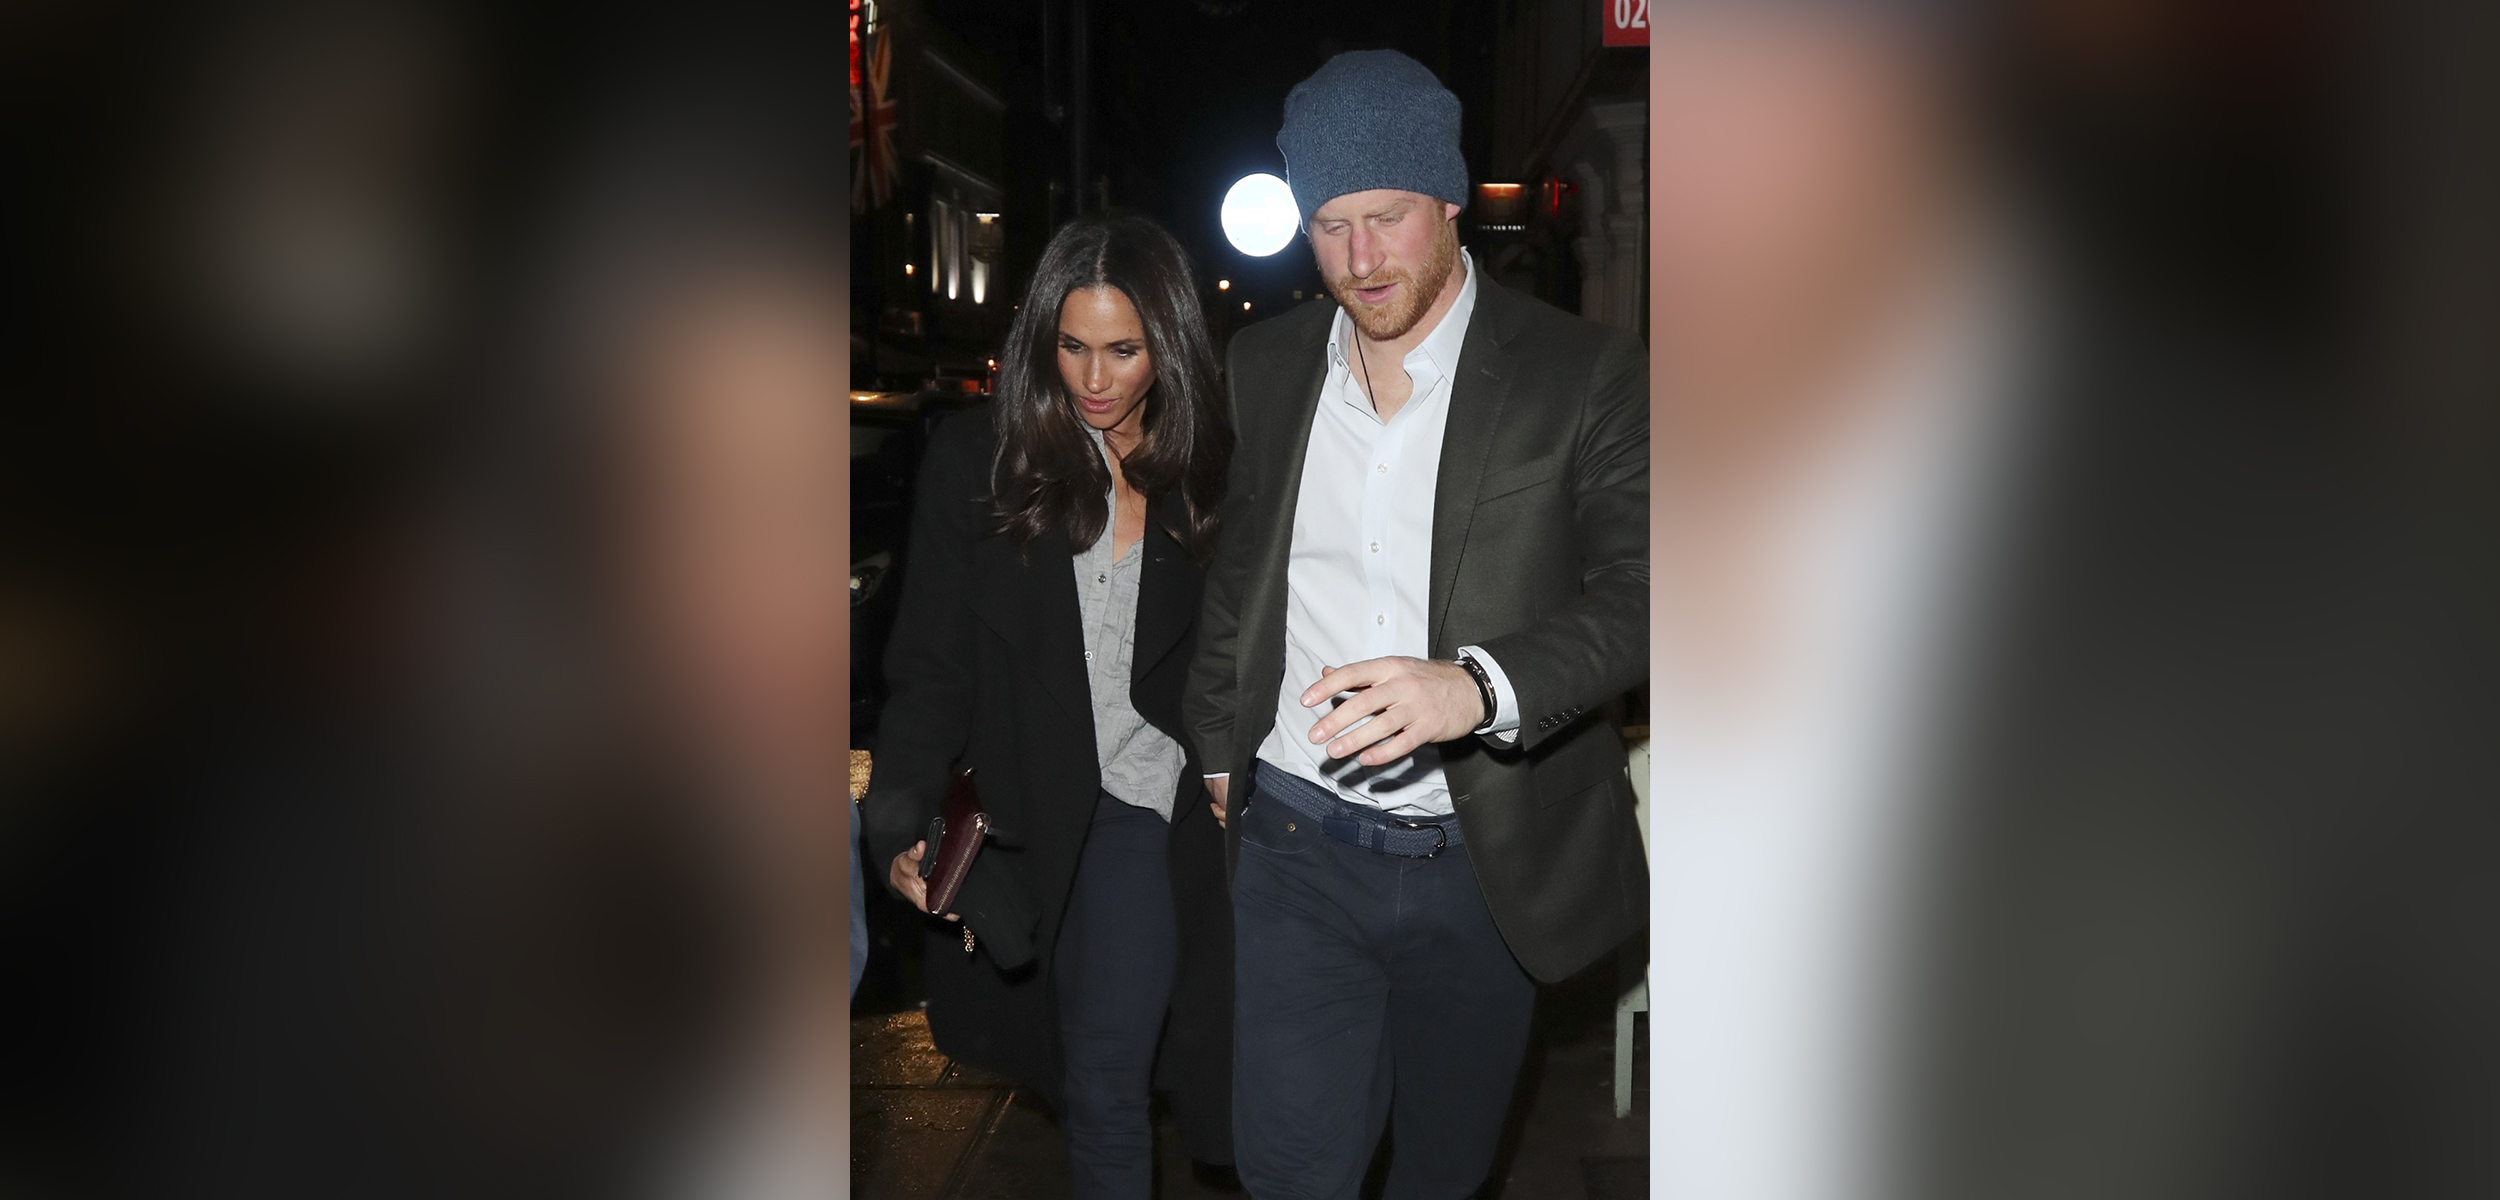 PHOTO: Prince Harry of Wales and Meghan Markle as they hold hands together on a date night while out in London, England on February 3, 2017. 